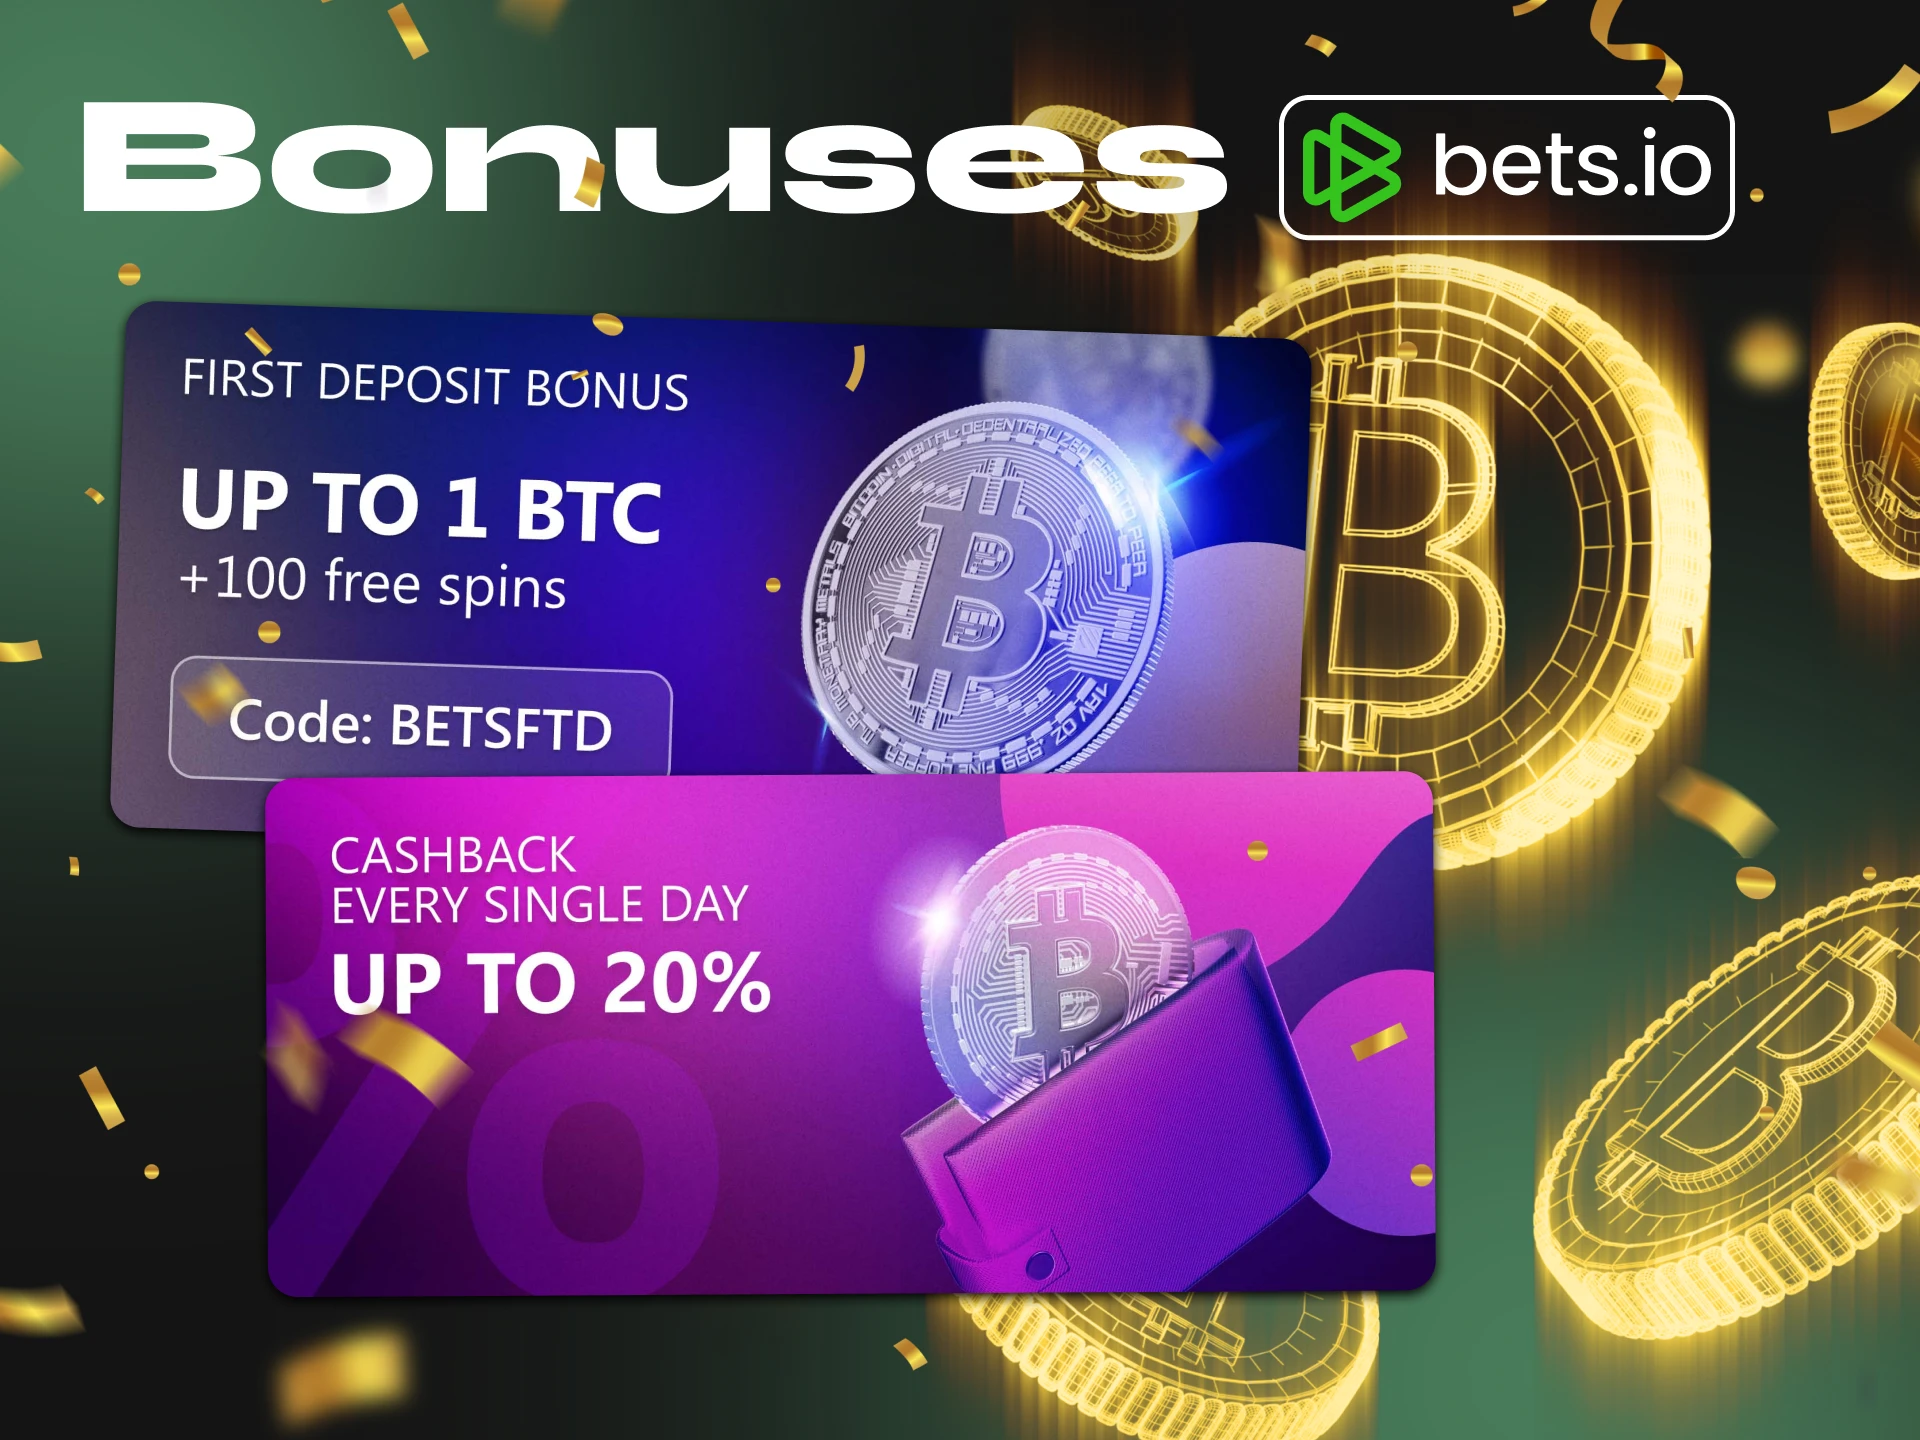 Bets.io Casino provides its users with various lucrative bonuses such as welcome bonus, cashback, VIP program, etc.